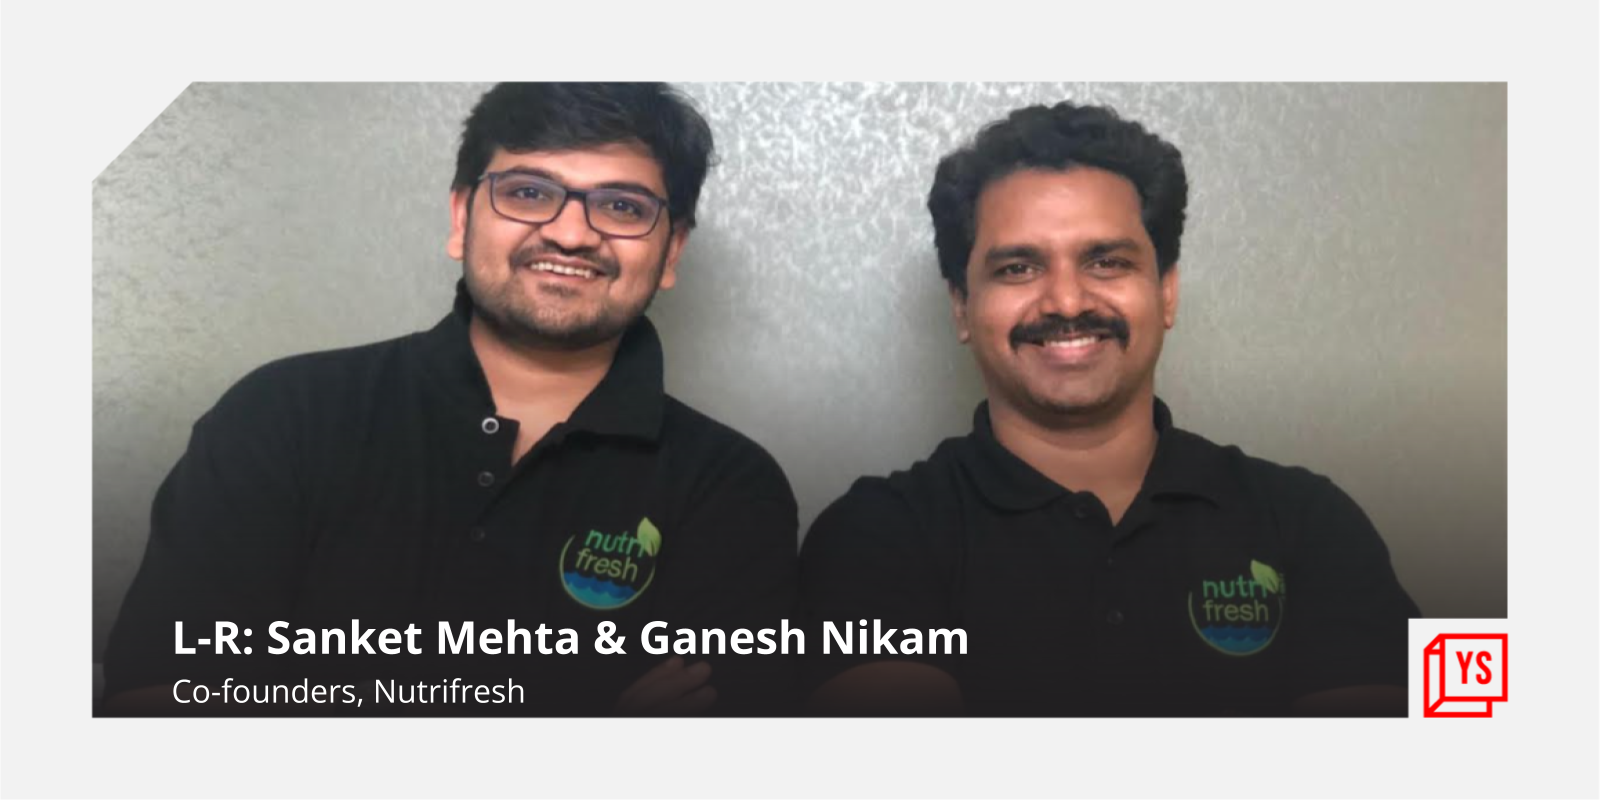 [Funding alert] Agritech startup Nutrifresh raises $5M in Pre-Series A round from global investors